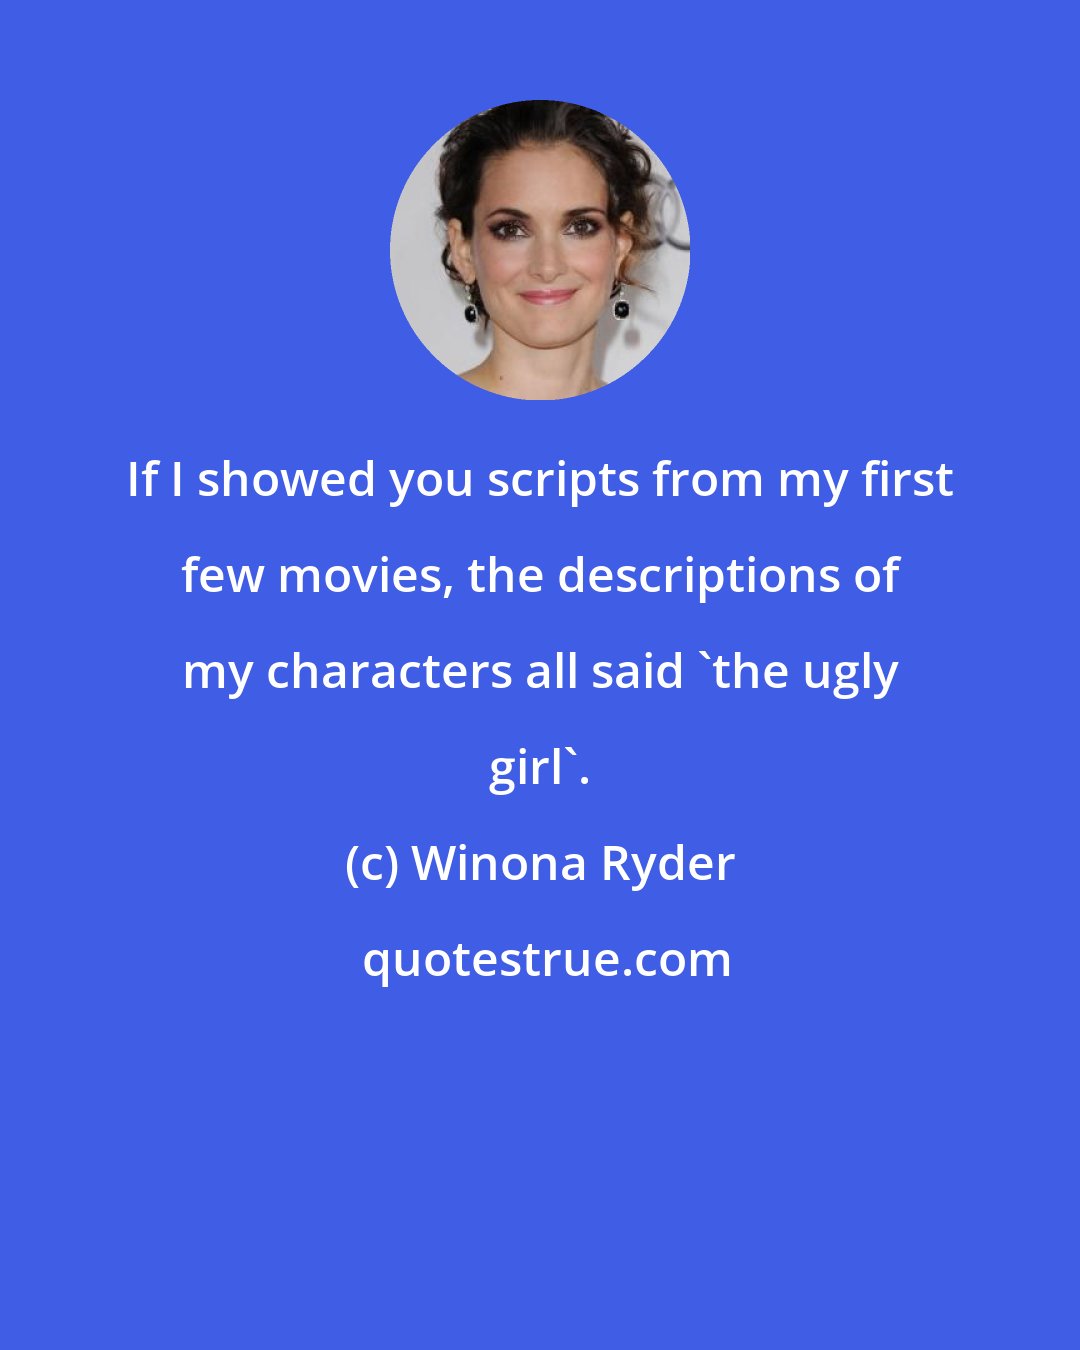 Winona Ryder: If I showed you scripts from my first few movies, the descriptions of my characters all said 'the ugly girl'.